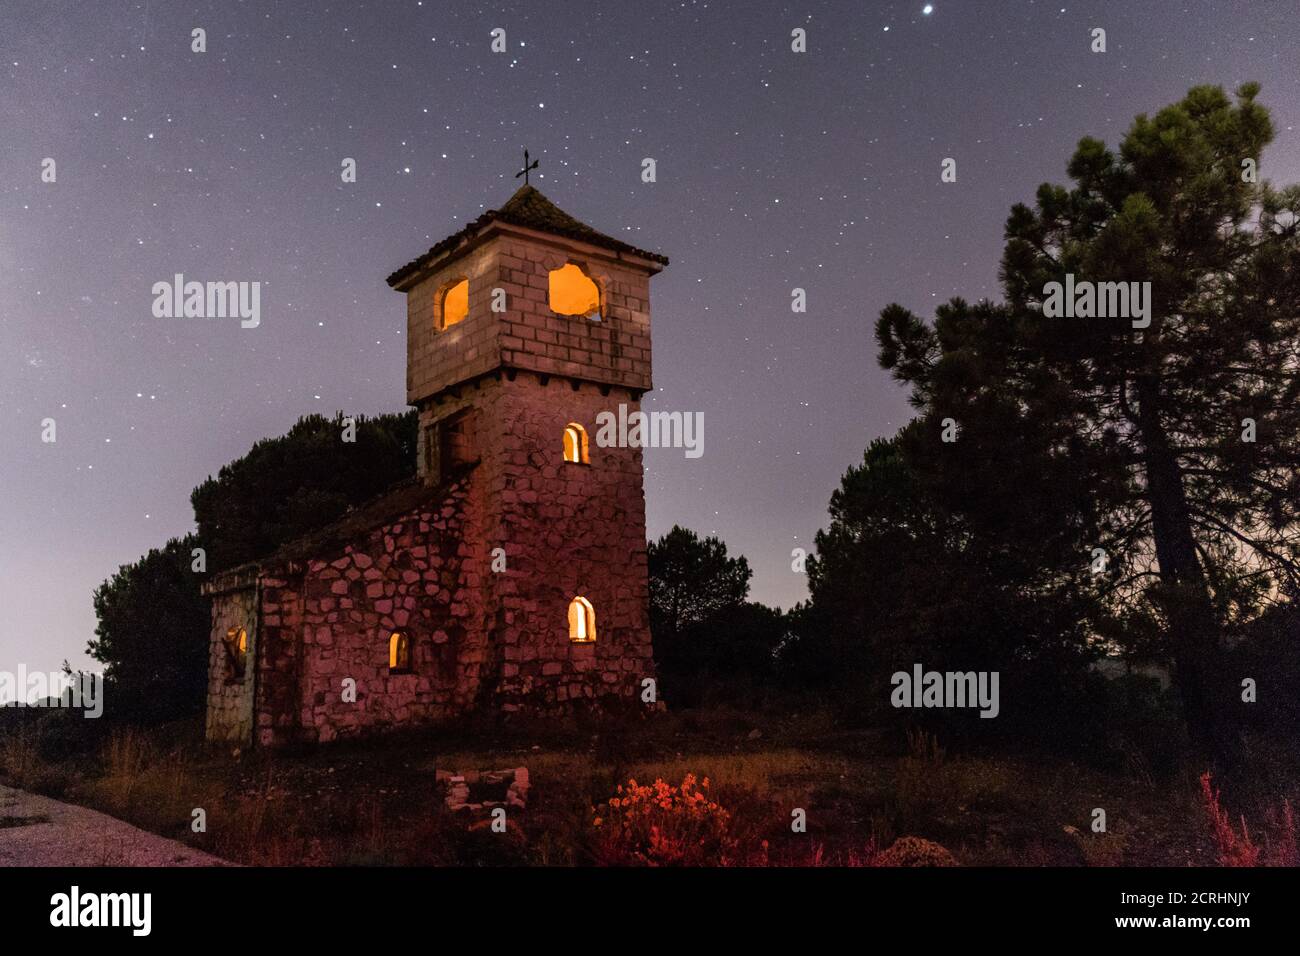 Enchanting house in the town of Alhaurin el Grande in Spain at nighttime Stock Photo